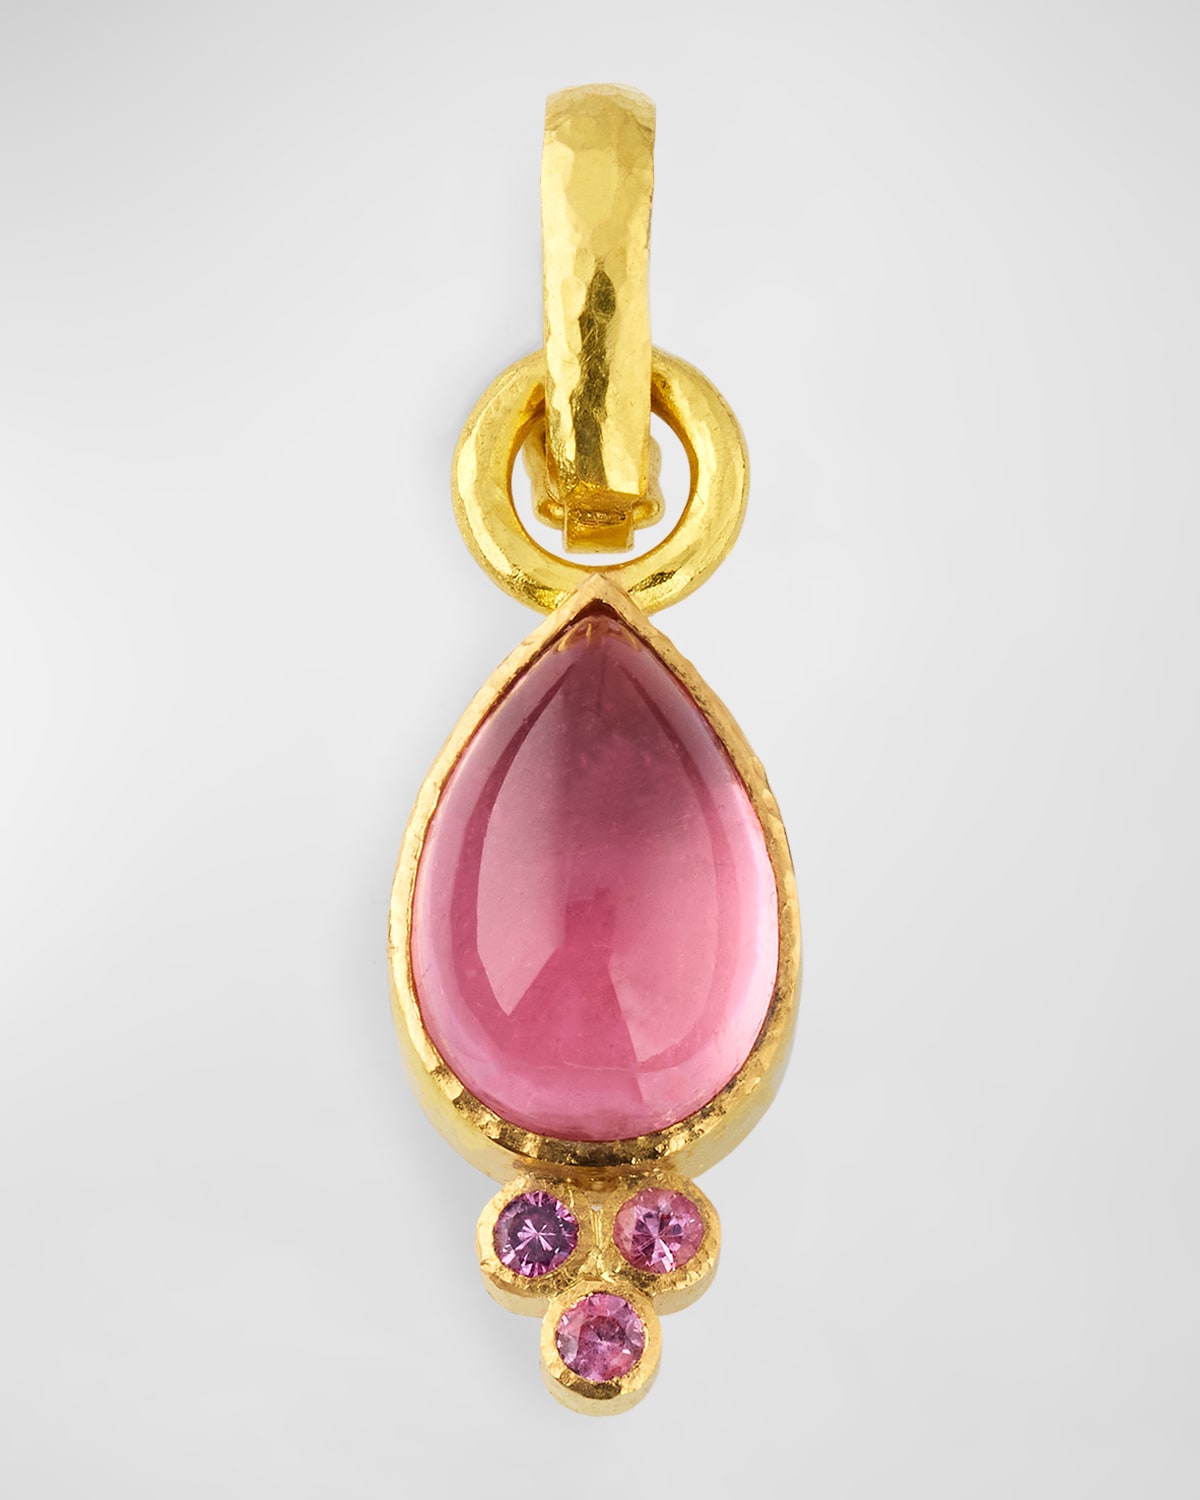 19K Yellow Gold Small Vertical Pear Shaped Pink Tourmaline and Sapphire Pendant